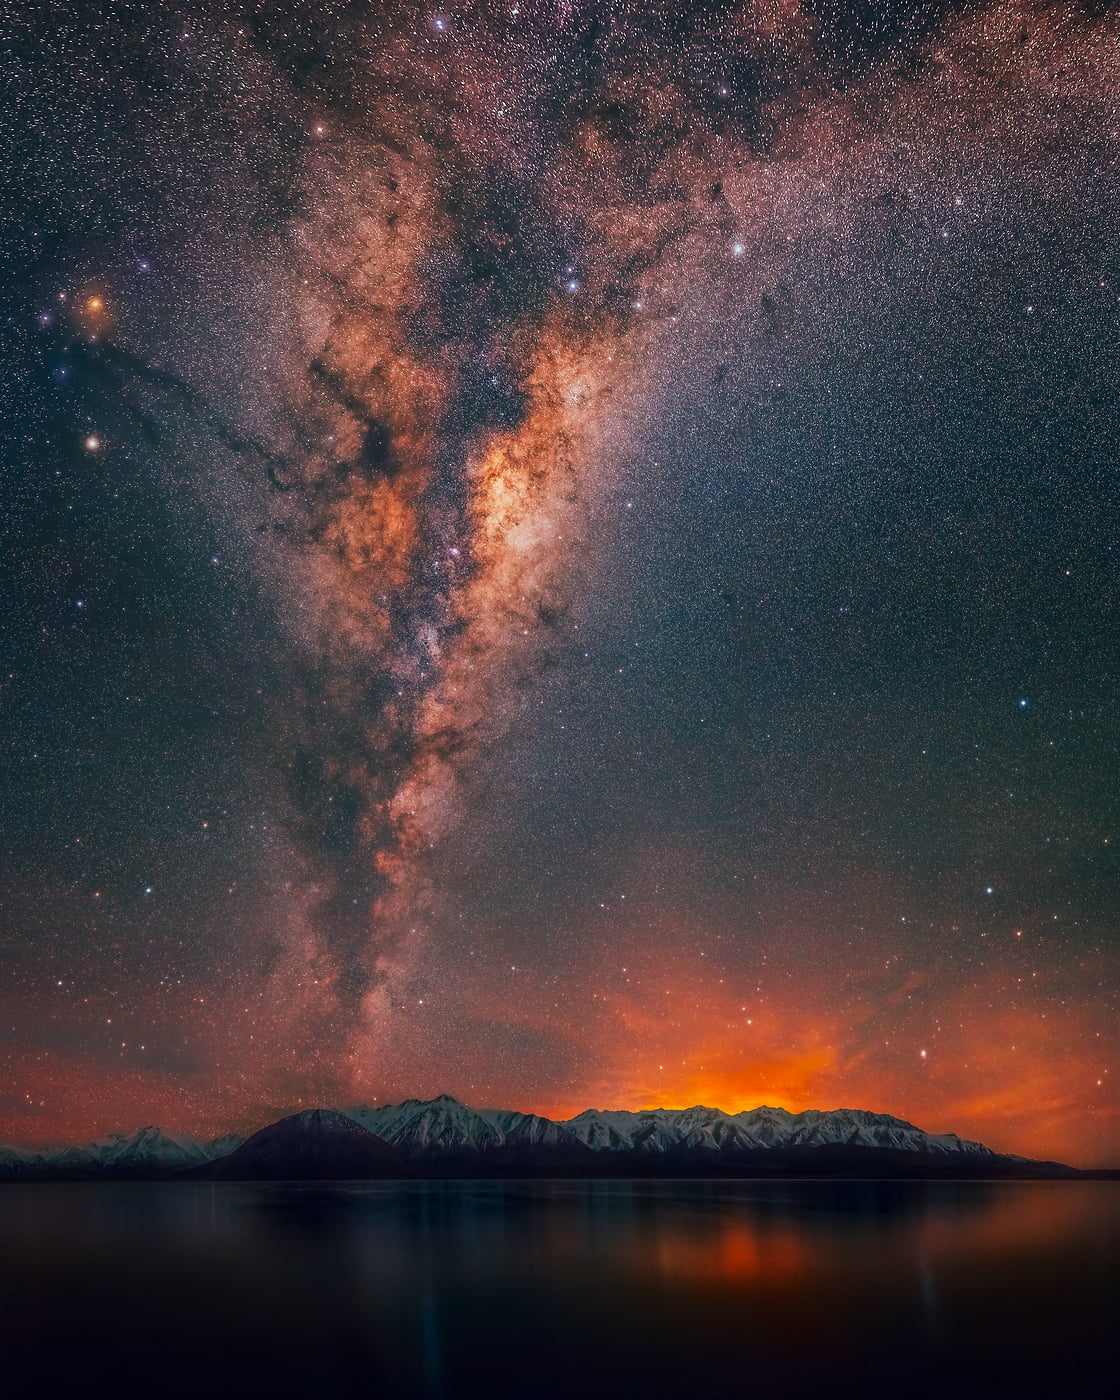 477 megapixels! A very high resolution, large-format VAST photo print of the night sky, milky way, and stars over mountains and a lake; fine art astrophotography landscape photo created by Paul Wilson in Lake Heron, New Zealand.